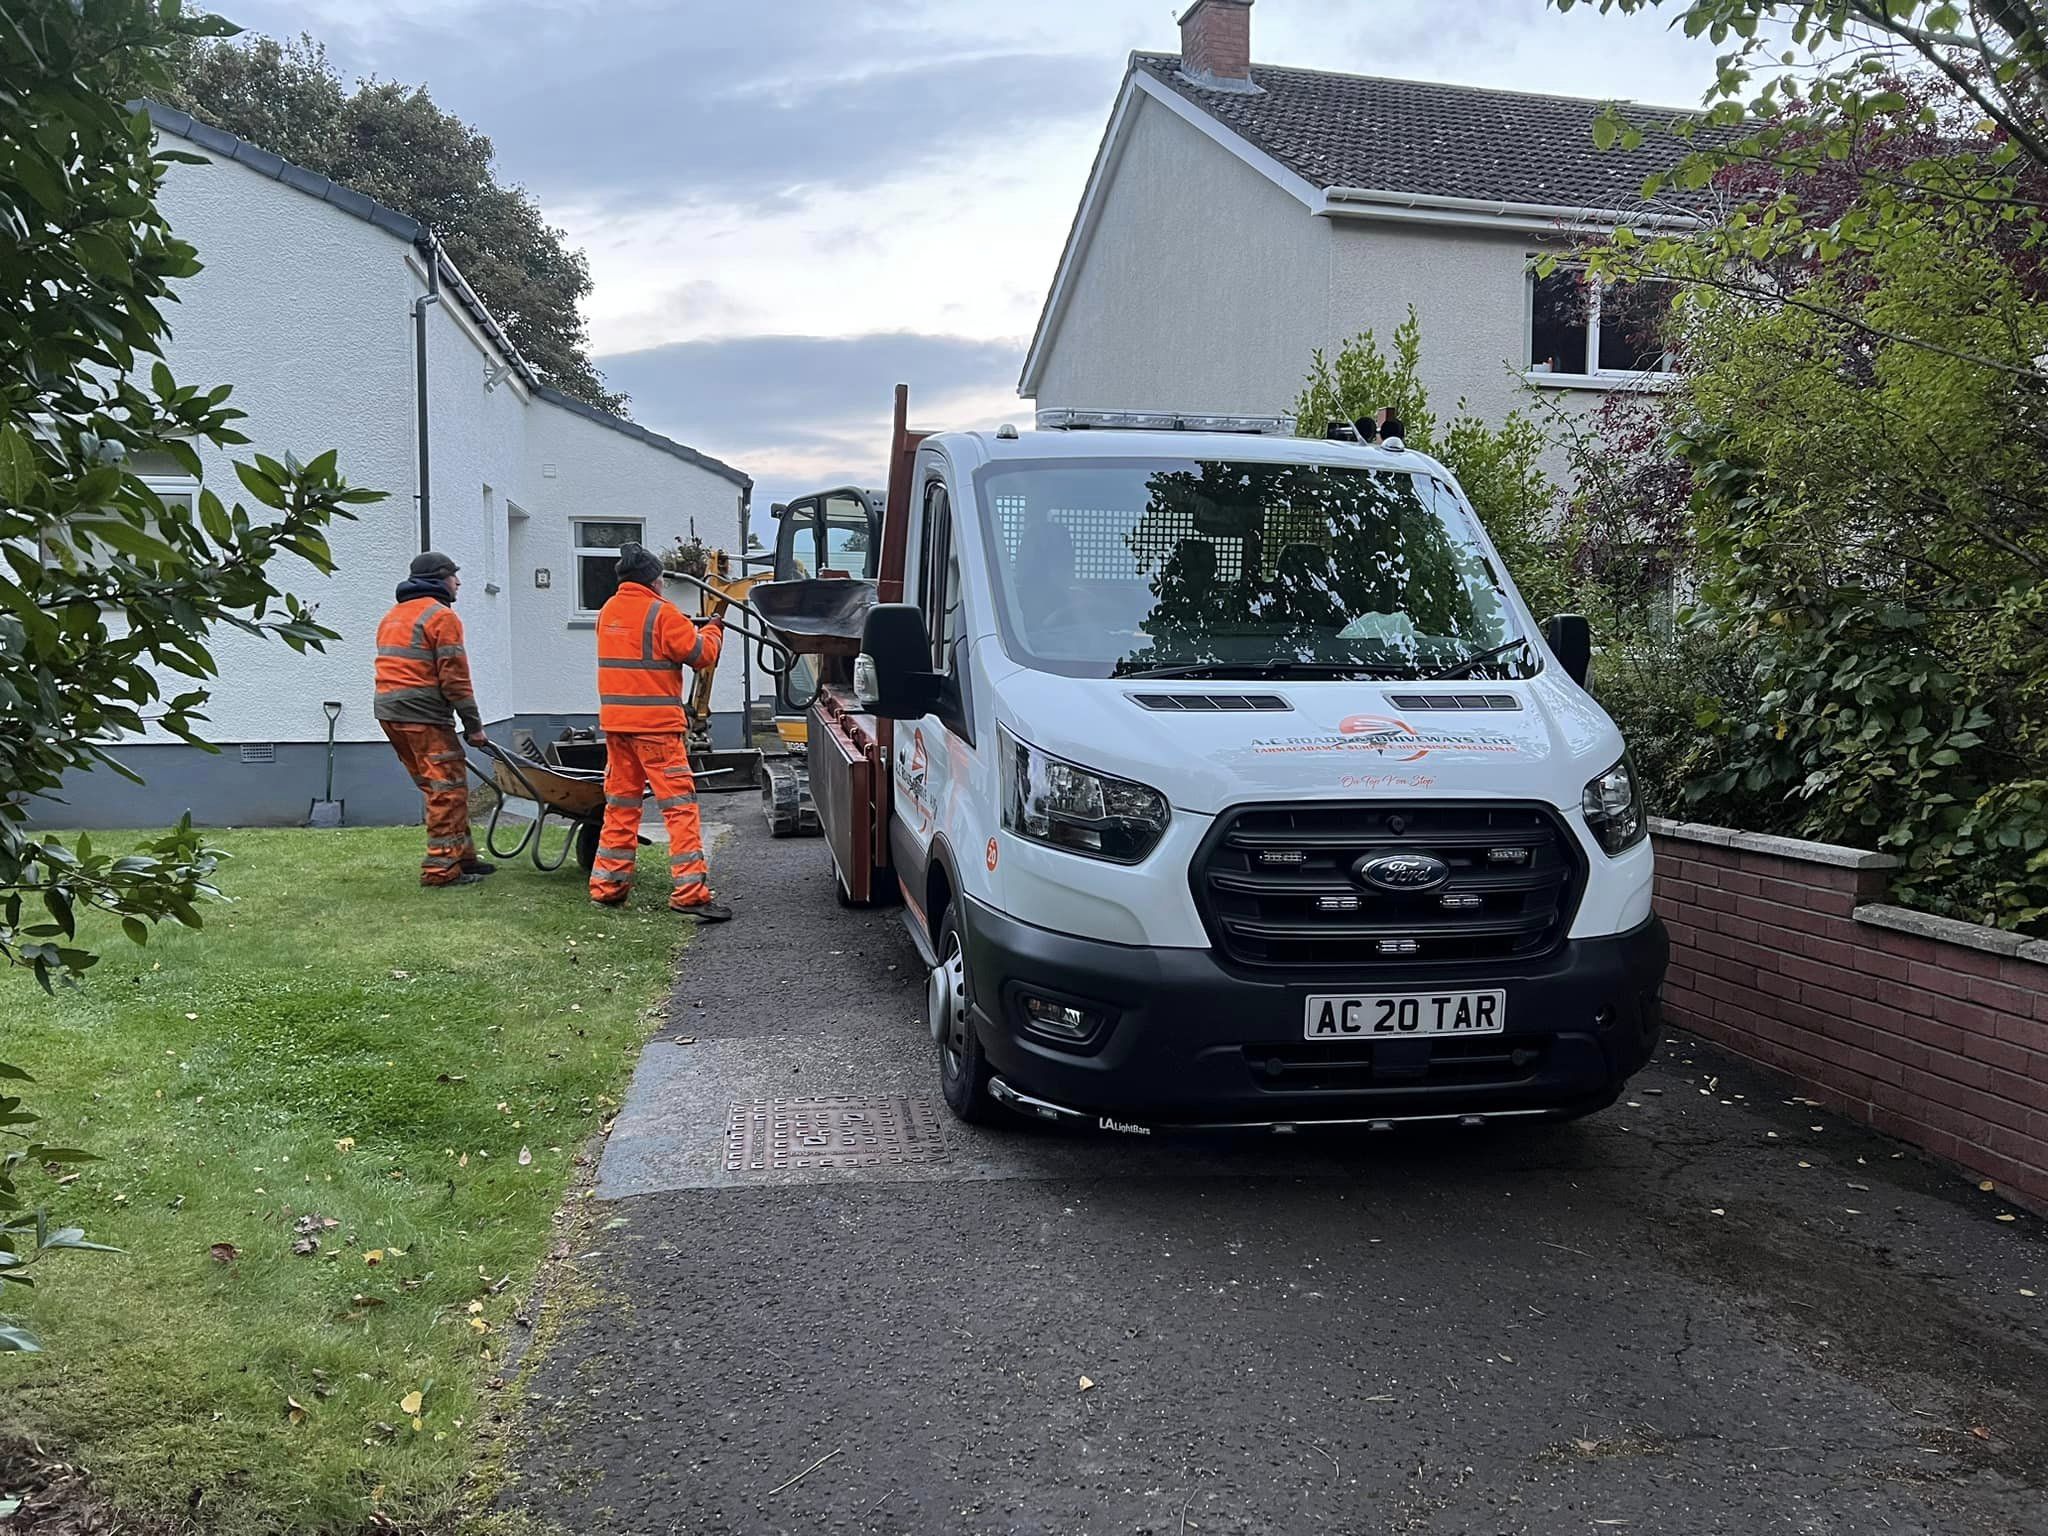 preparation work to extend driveway